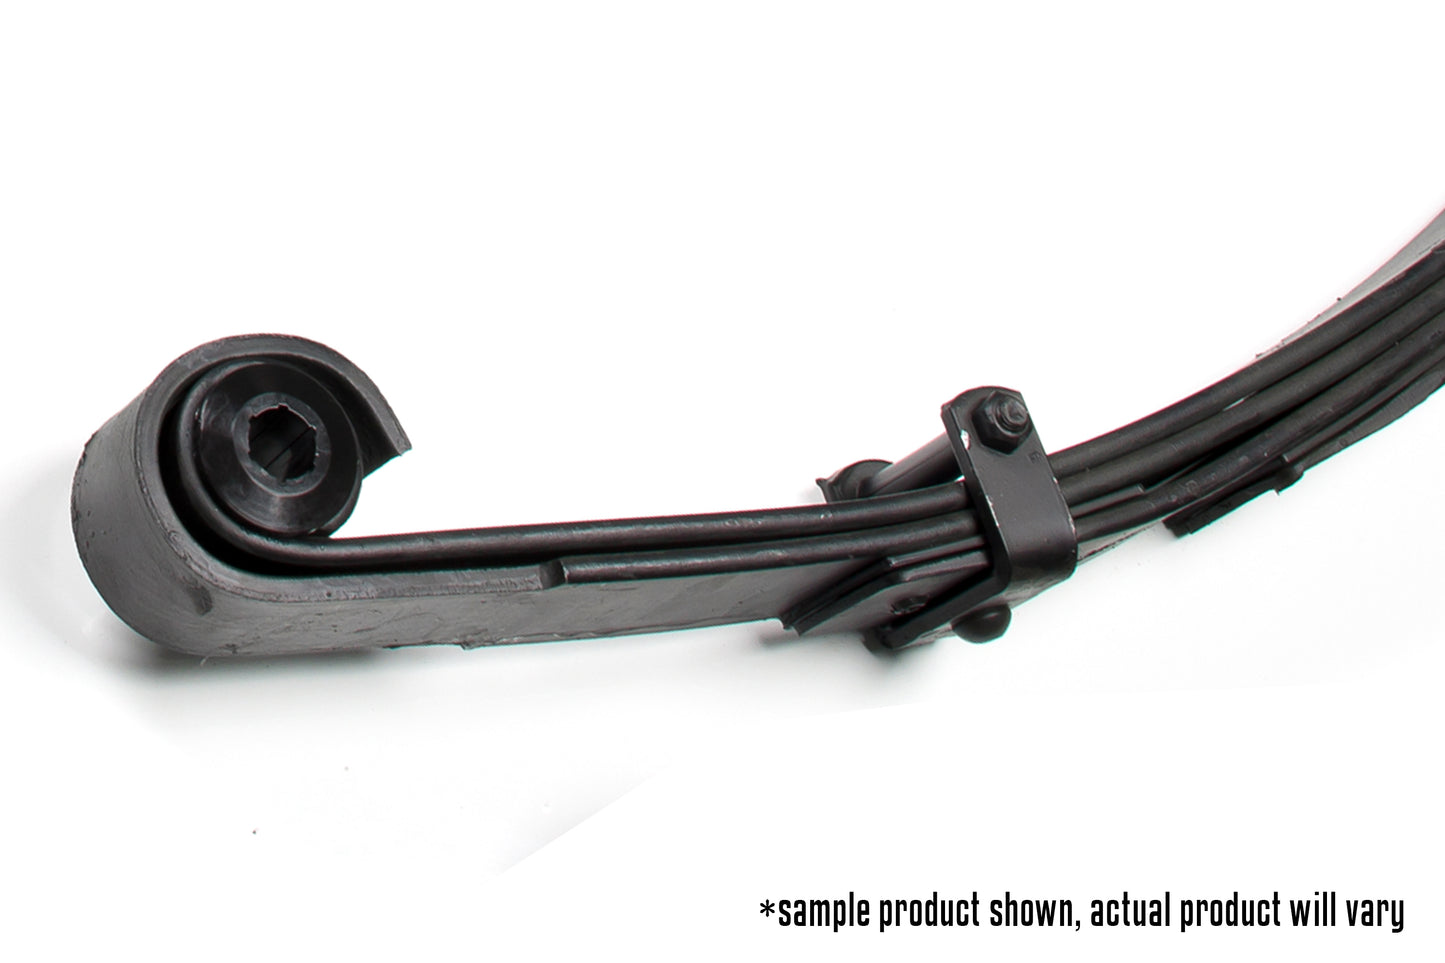 Rear Leaf Spring - 6 Inch Lift - Chevy/GMC 1/2 Ton Truck & SUV (77-91) - Off-Road Express